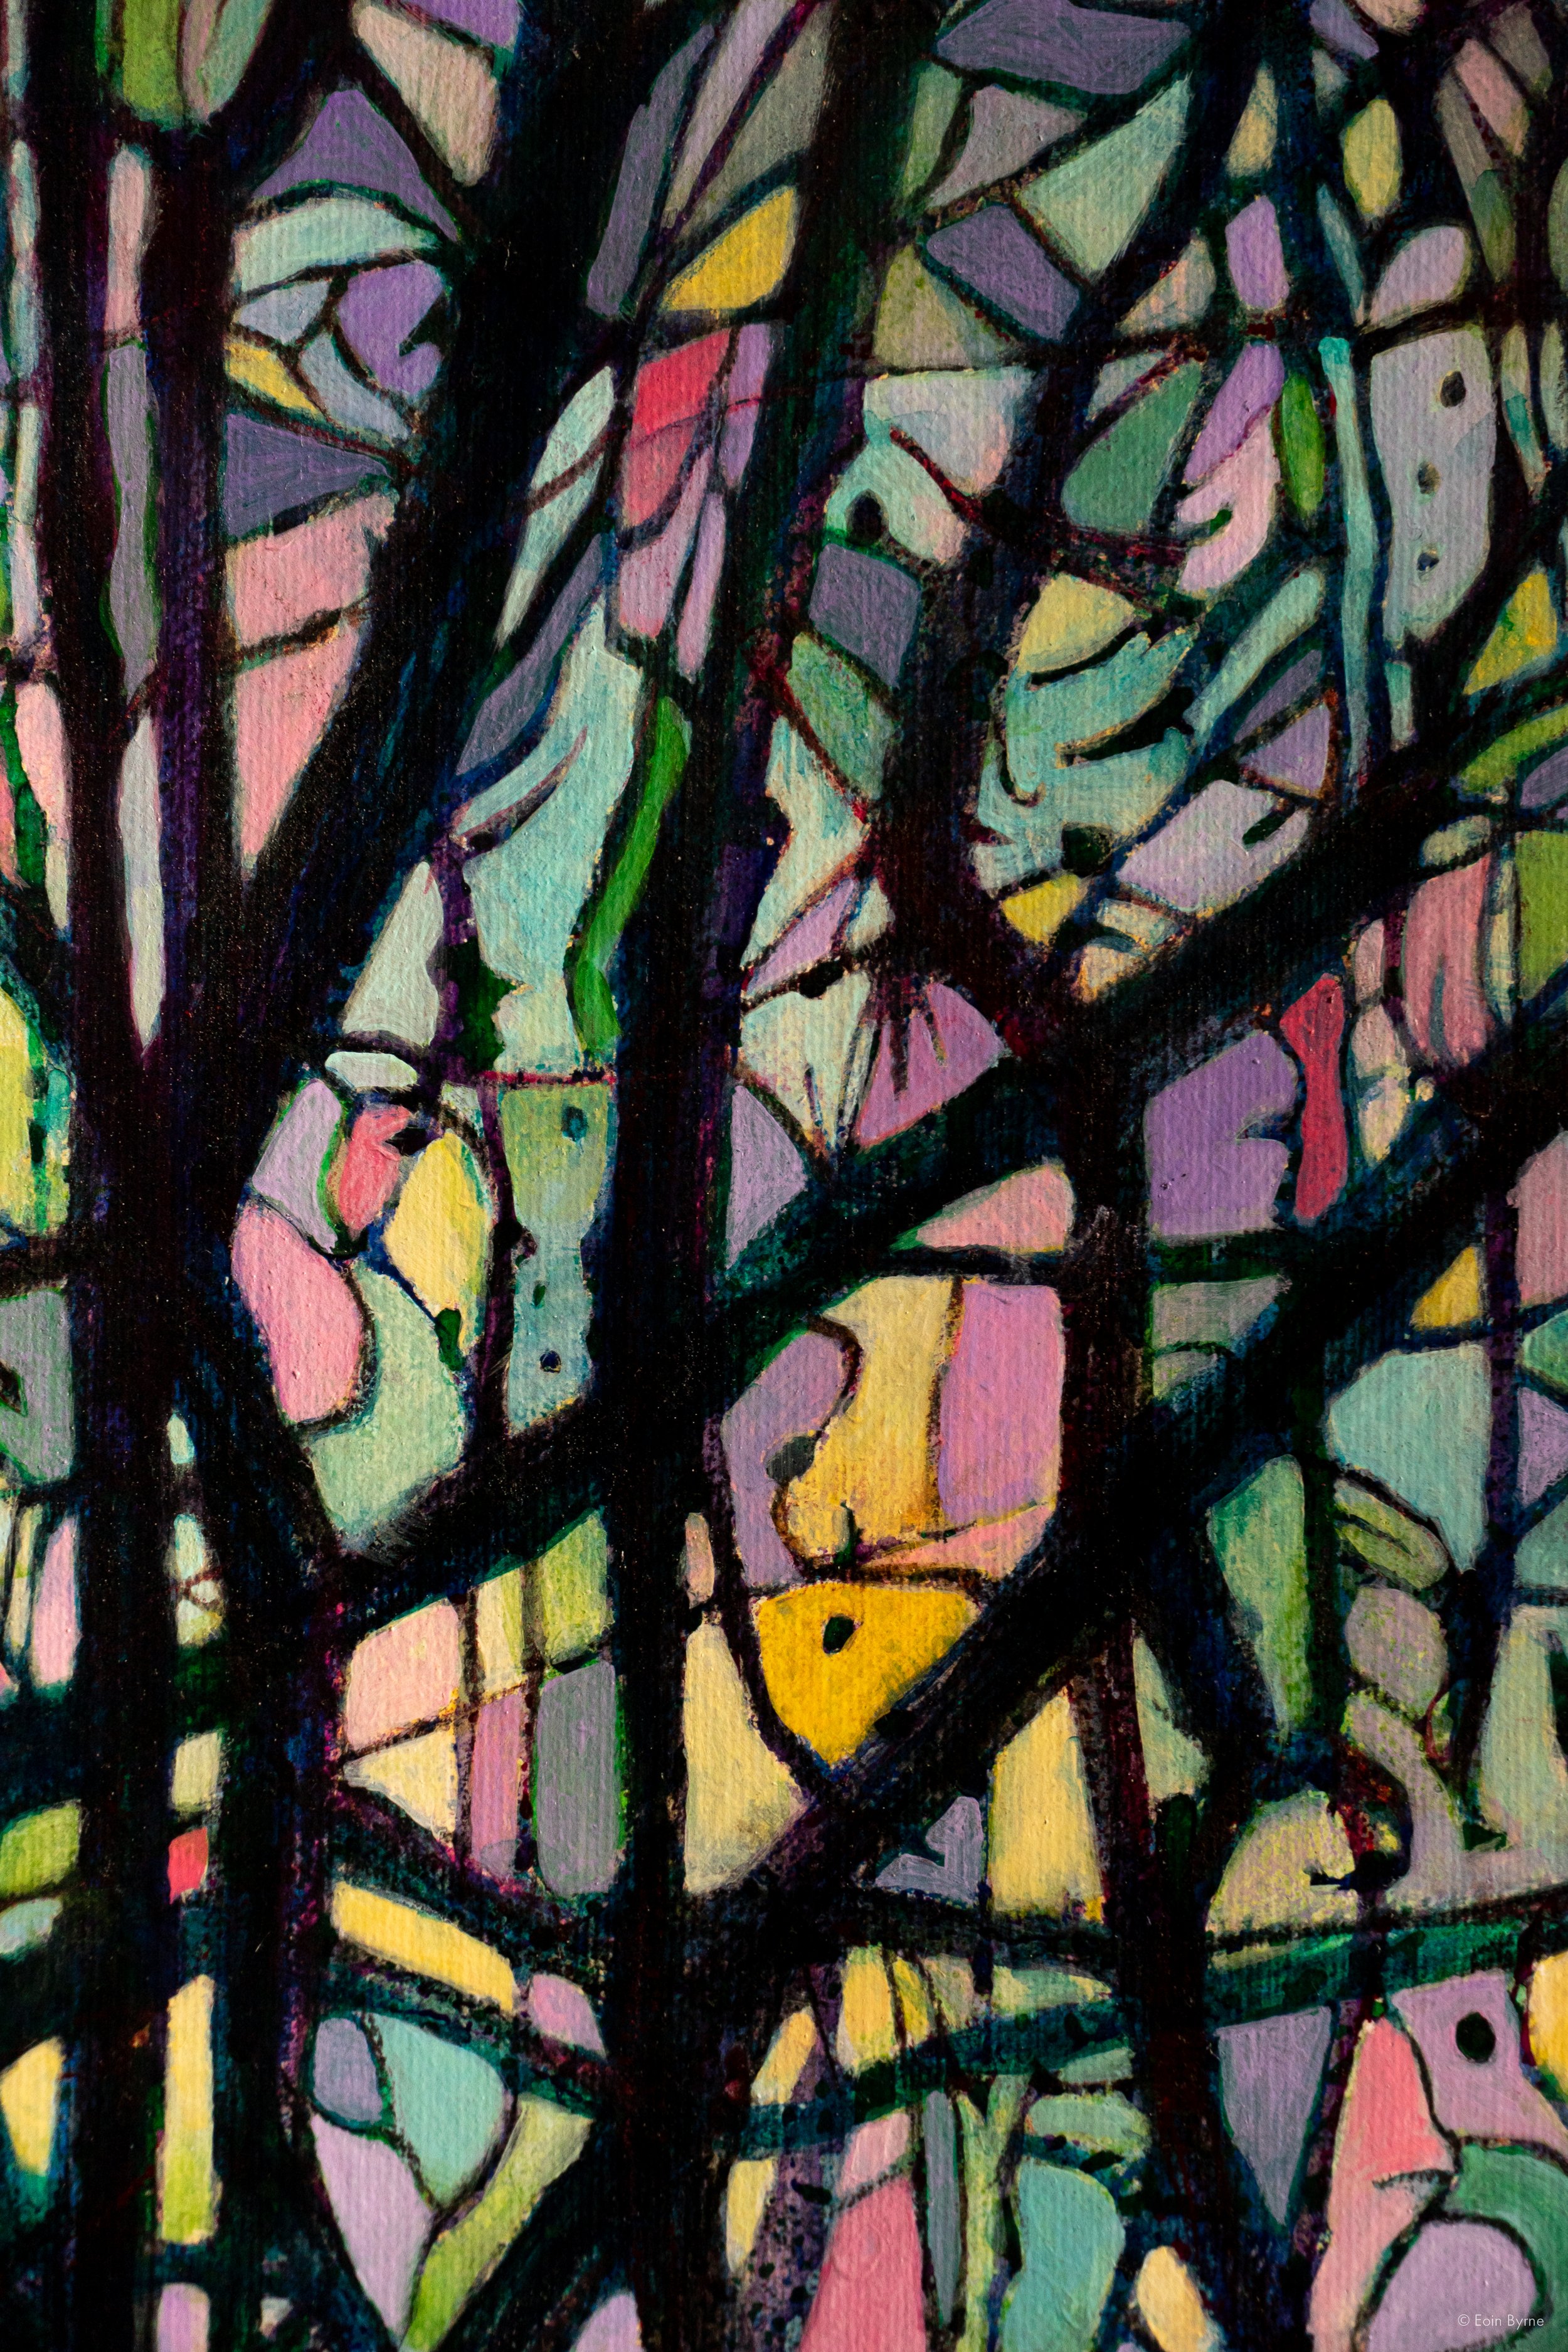 "Looking up through trees" (detail 2)